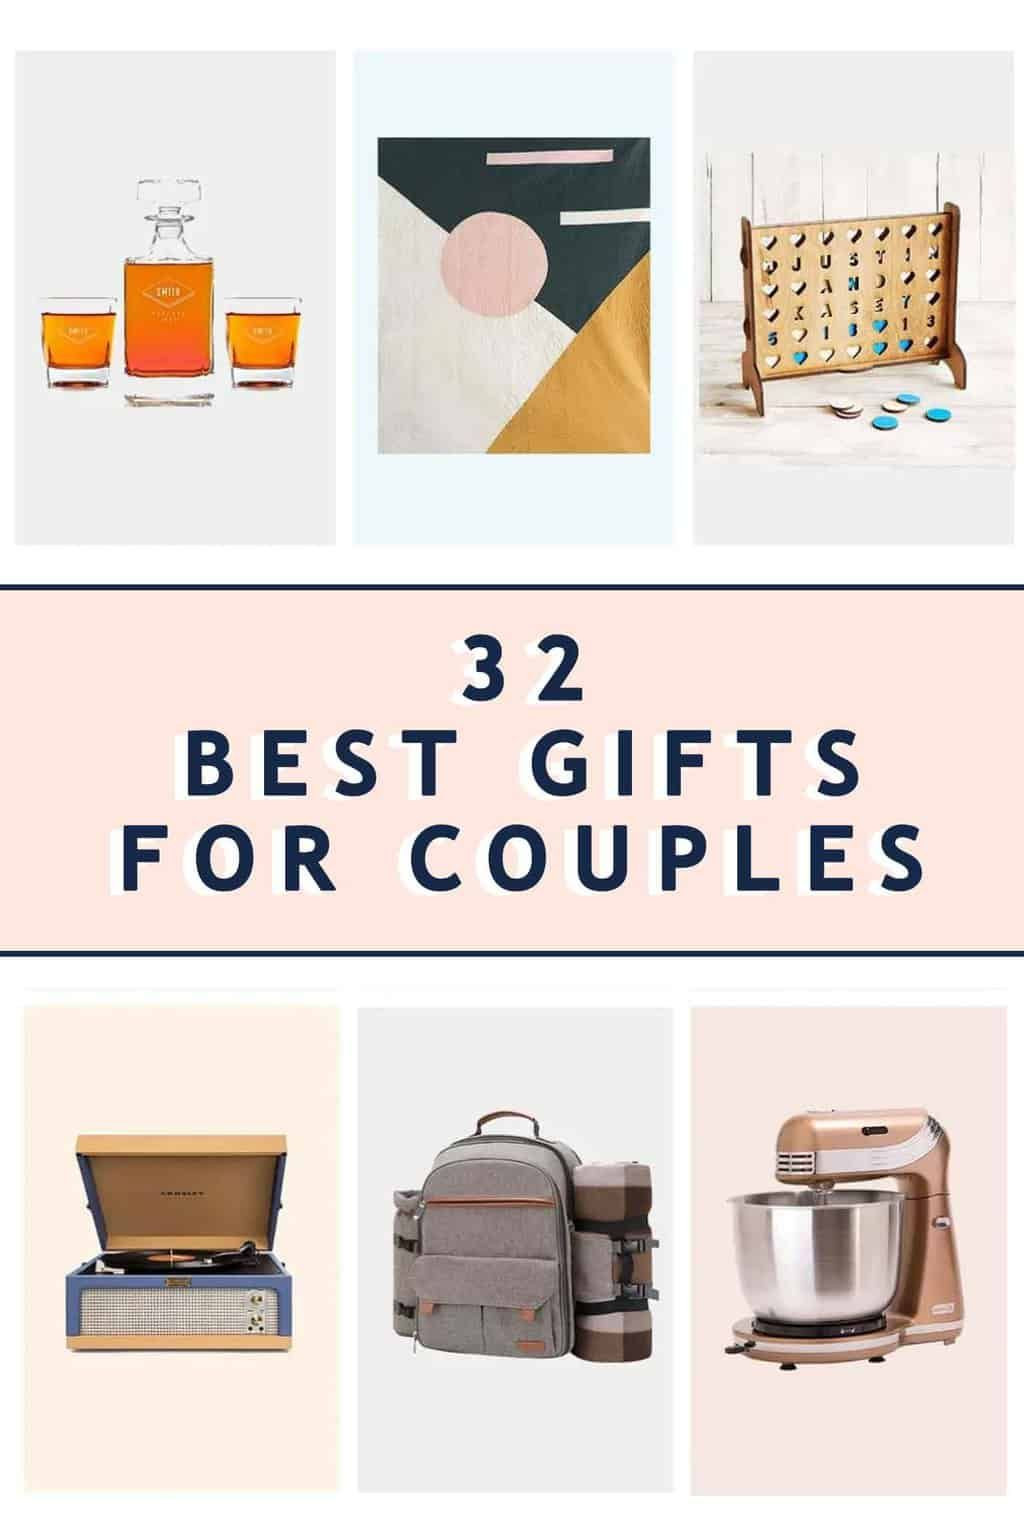 Creative Gift Ideas For Couples
 Gifts for Couples Modern & Unique Gift Ideas for Couples